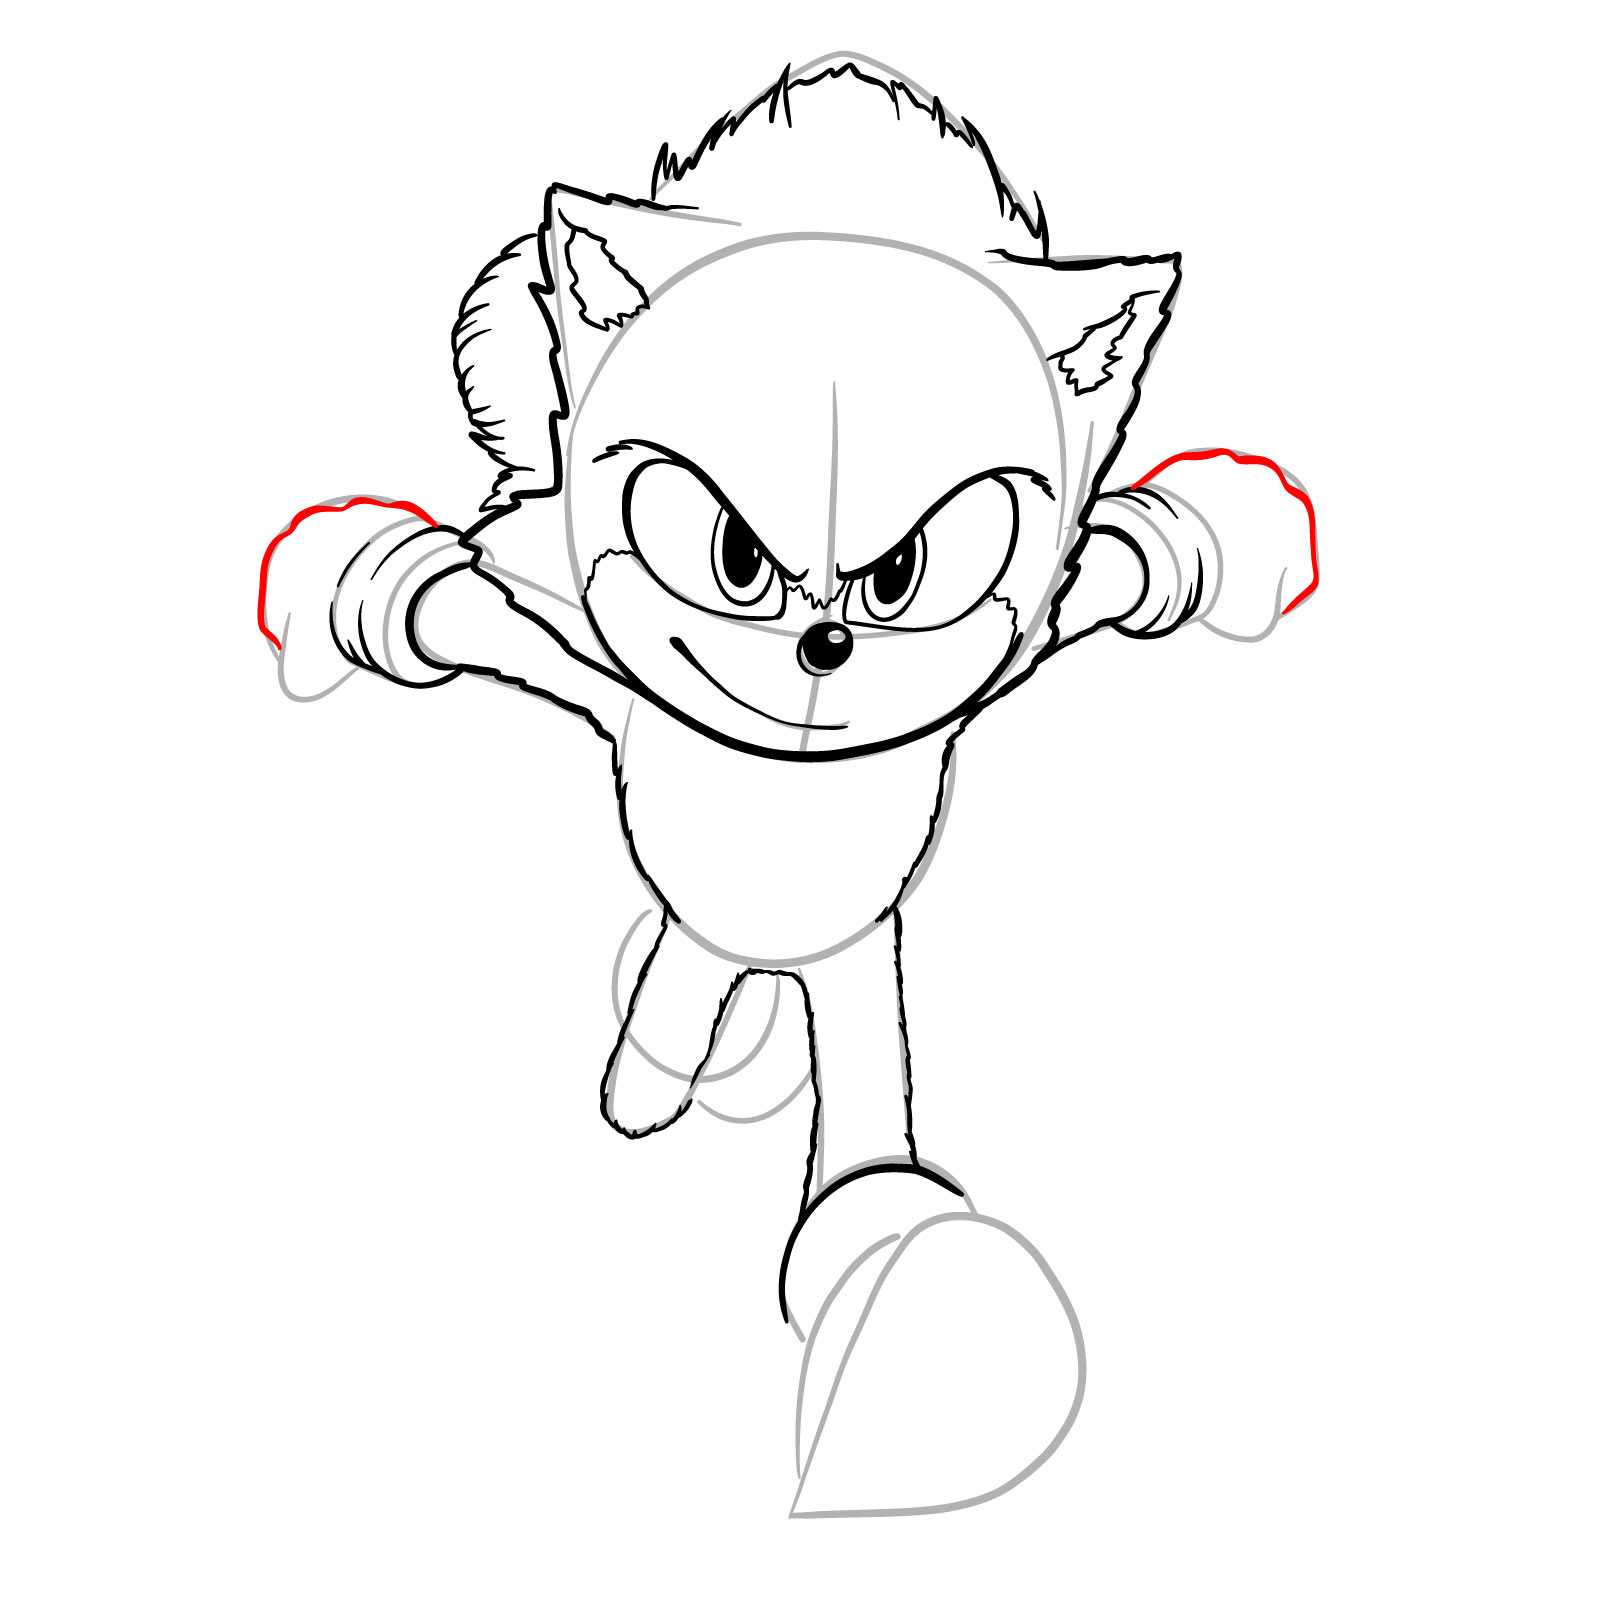 How to draw Sonic from the movie - step 21